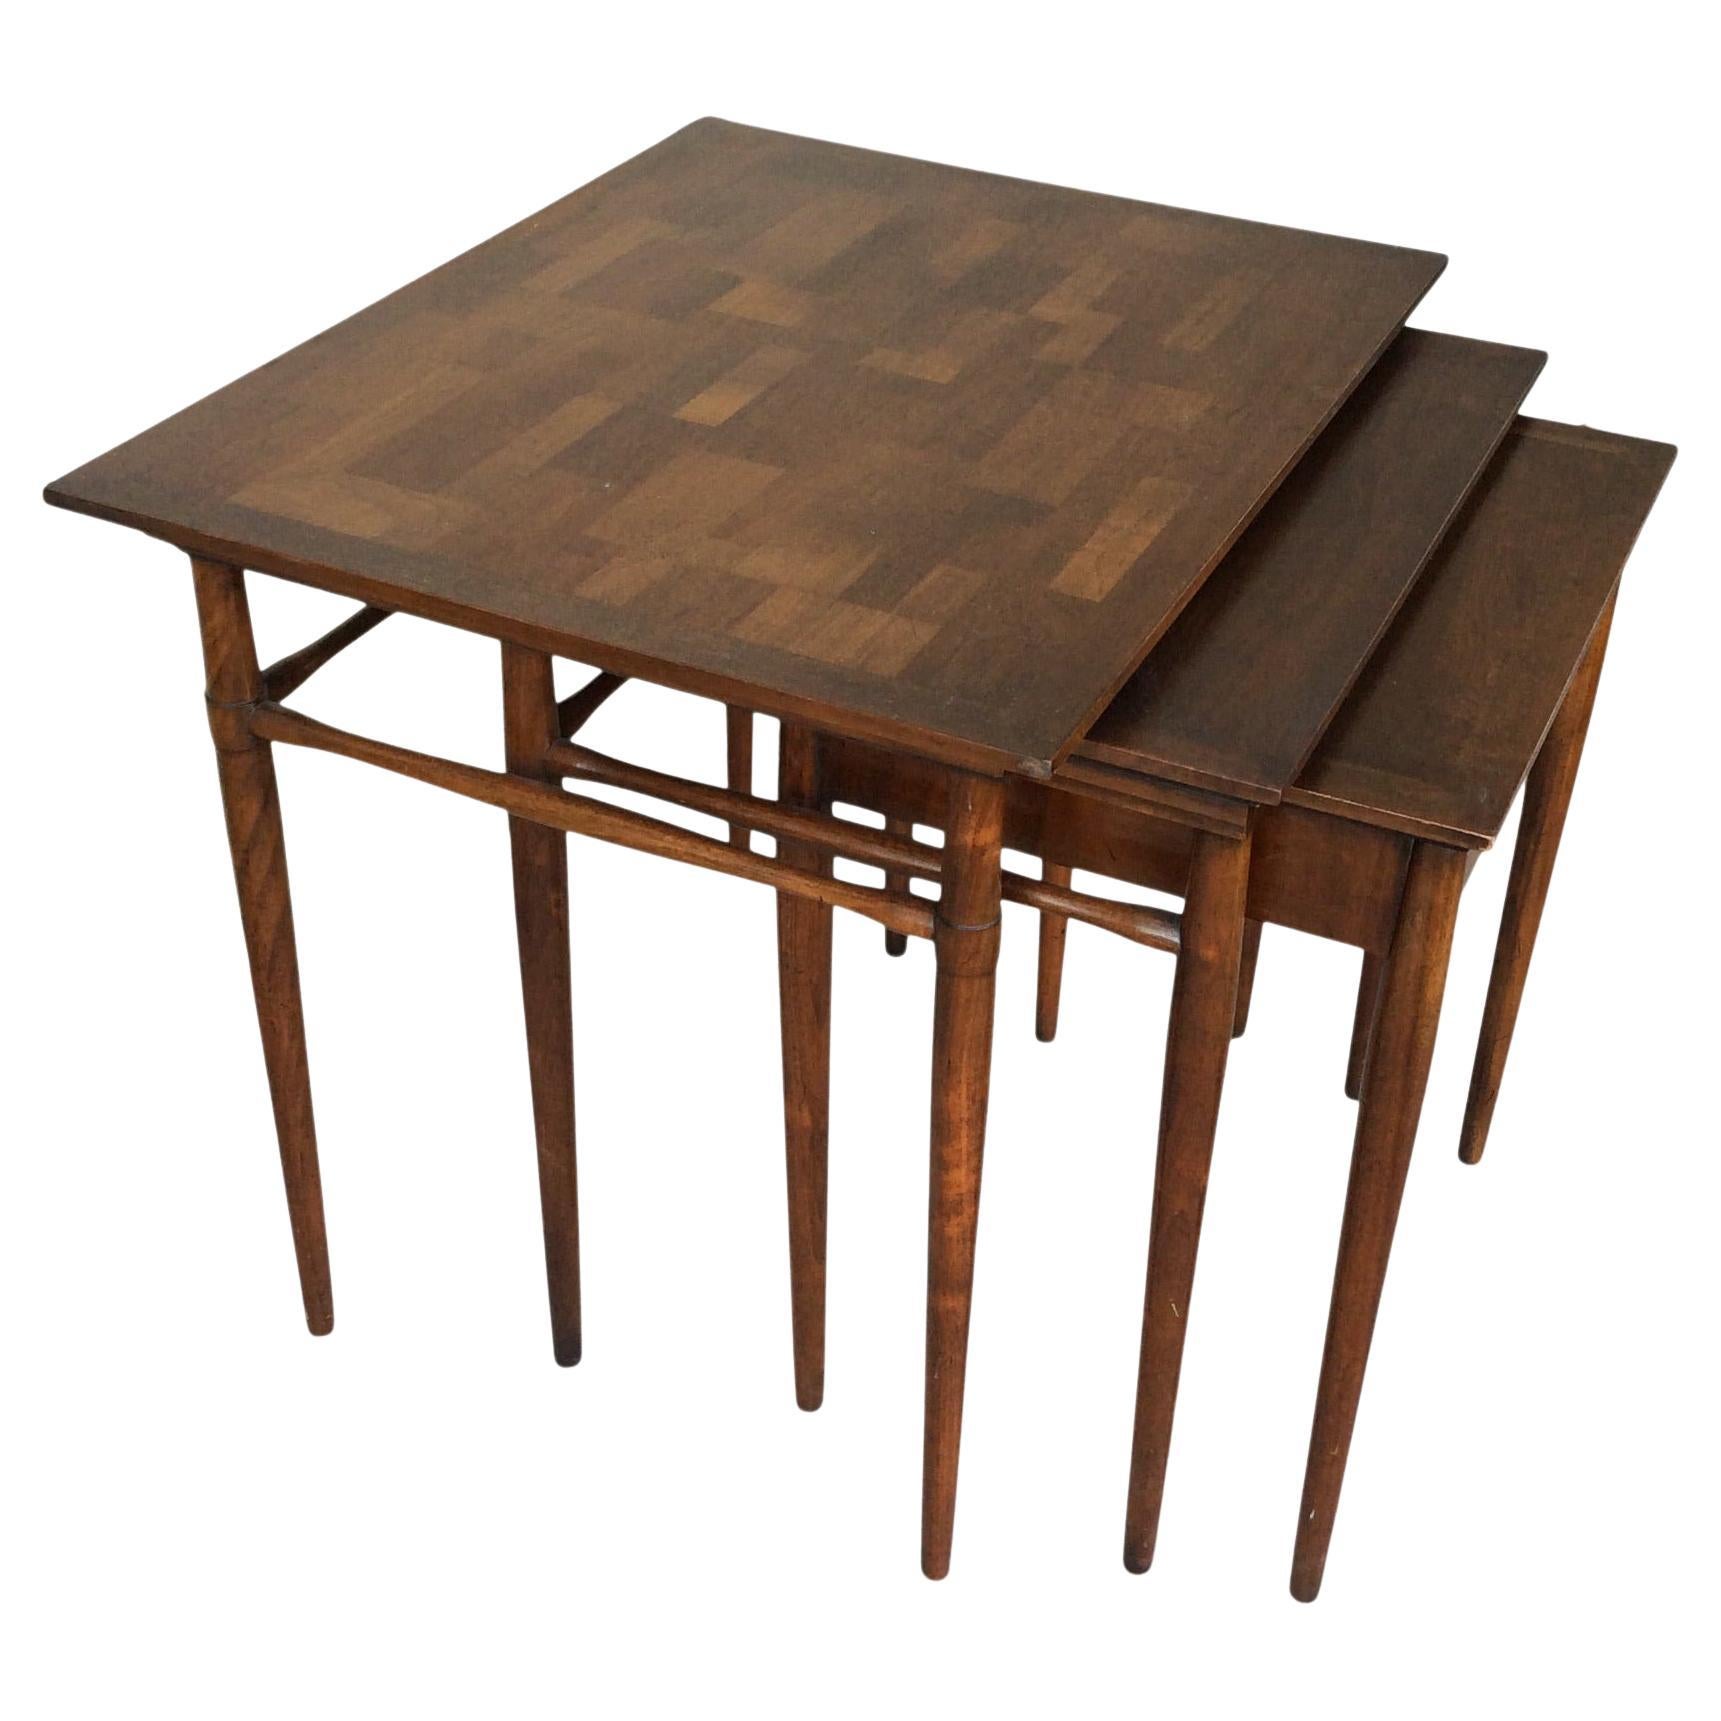 Vintage Mid-Century Modern Wood Nesting Tables, 3 Pieces For Sale